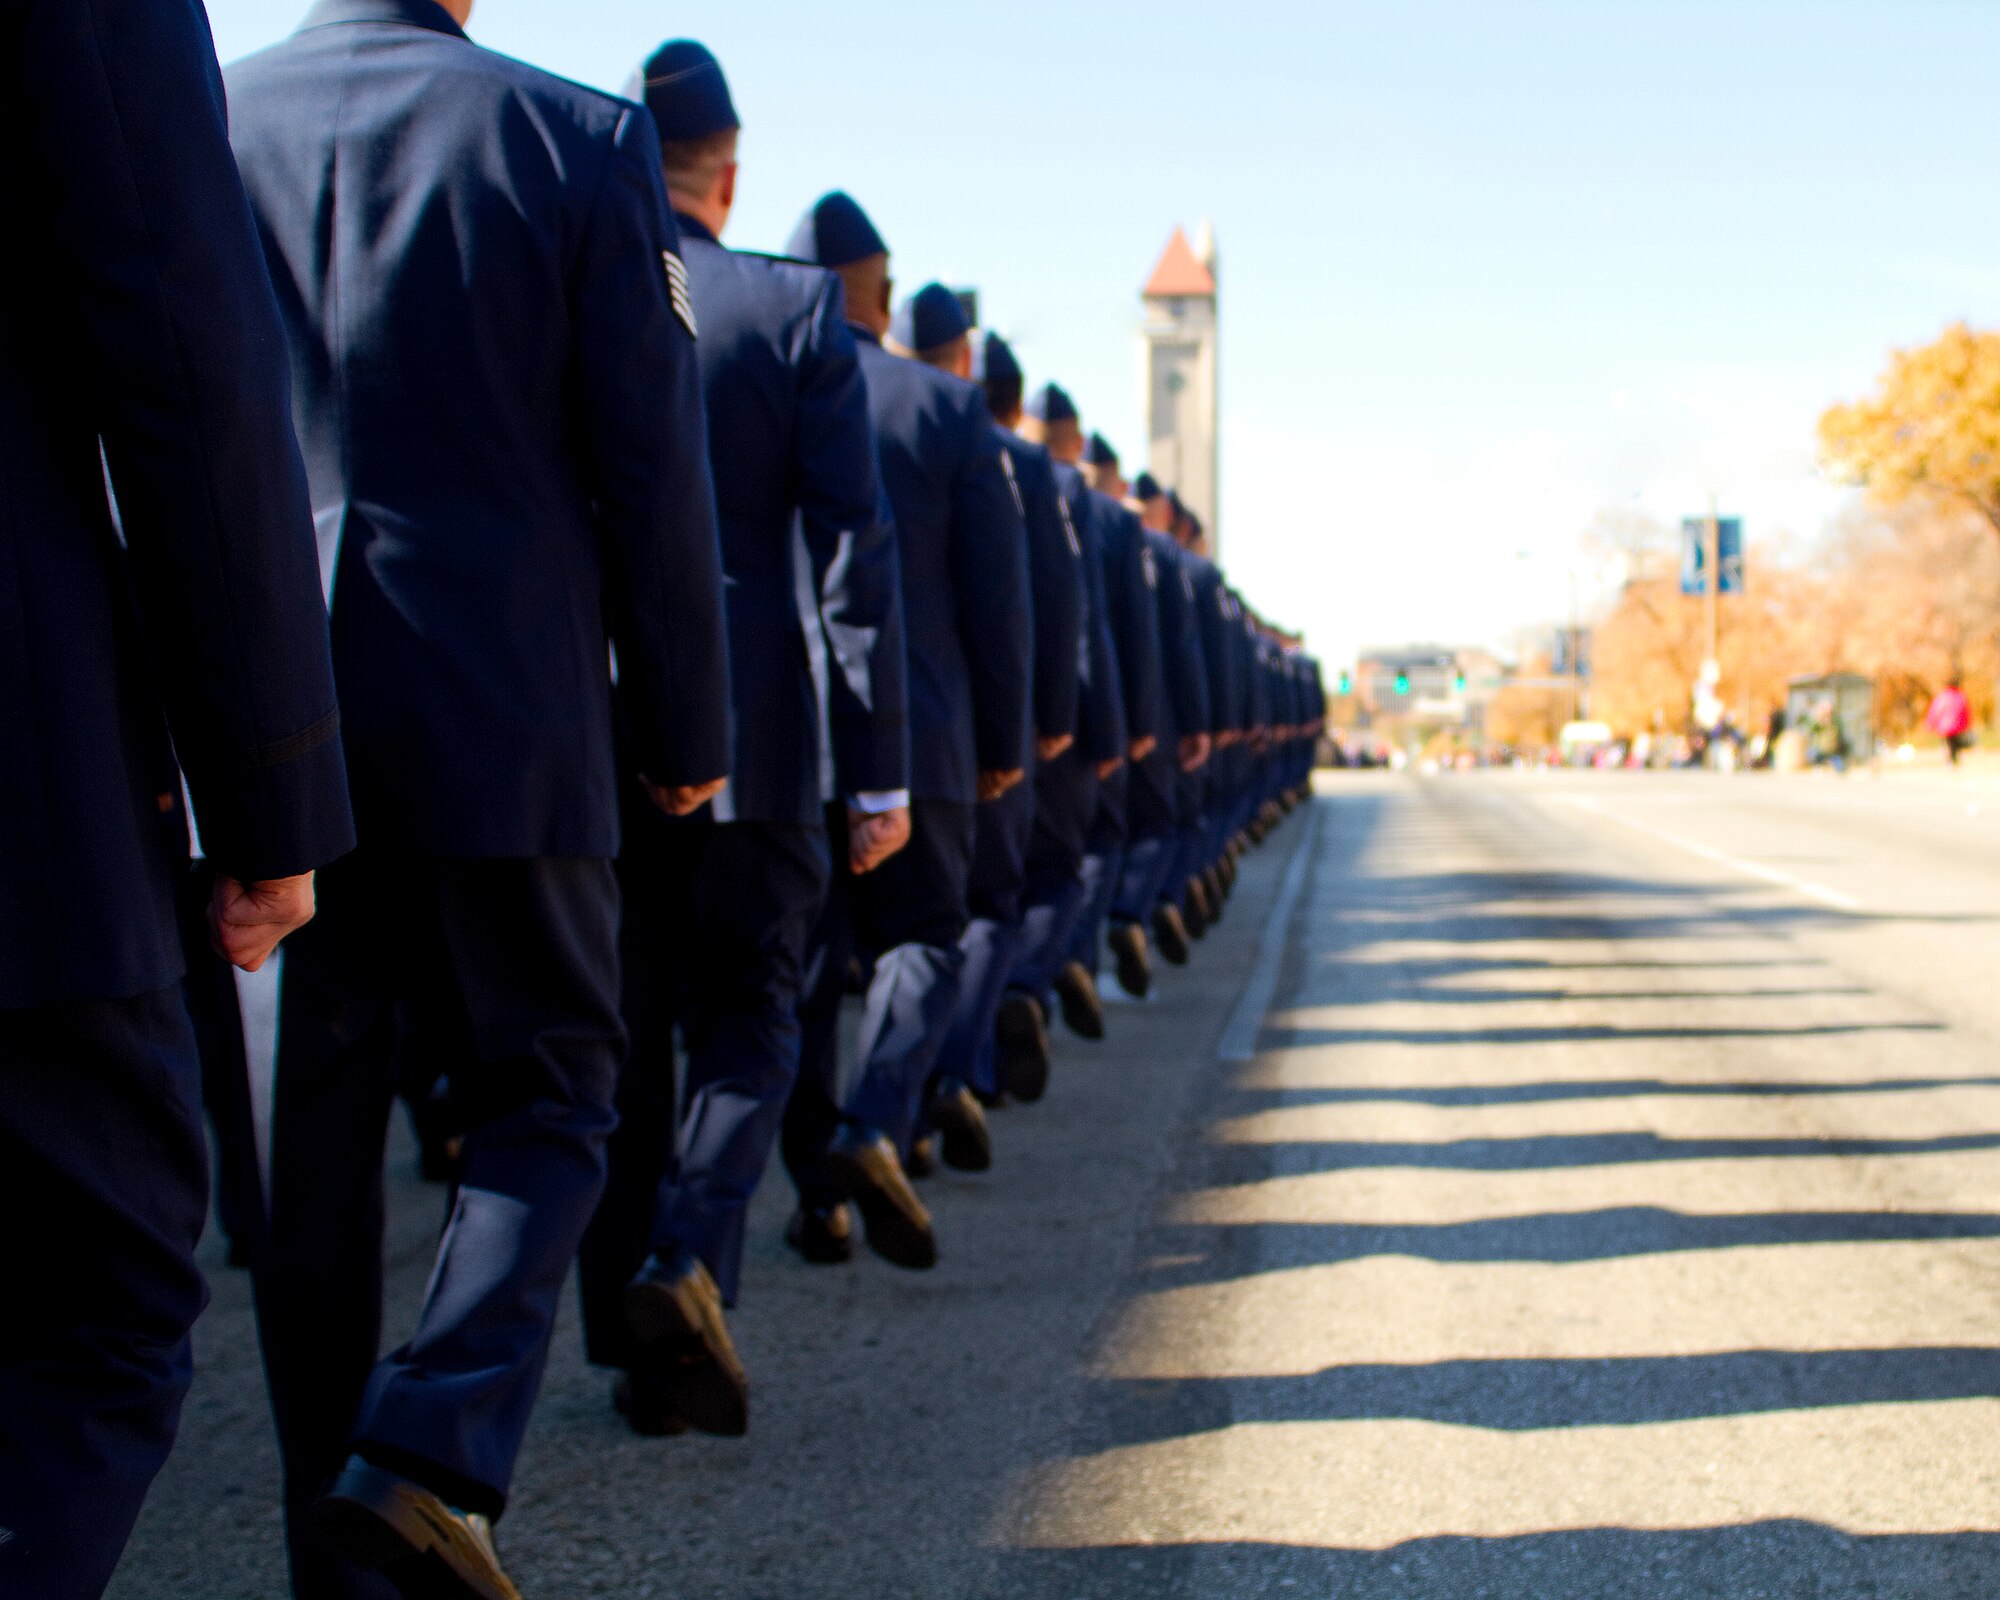 More than 100 Airmen from the Air Force Network Integration Center at Scott Air Force Base, Ill., participated in the St. Louis Veterans Day parade Nov 6.  (U.S. Air Force photo/MSgt G. Shawn Lowry)
